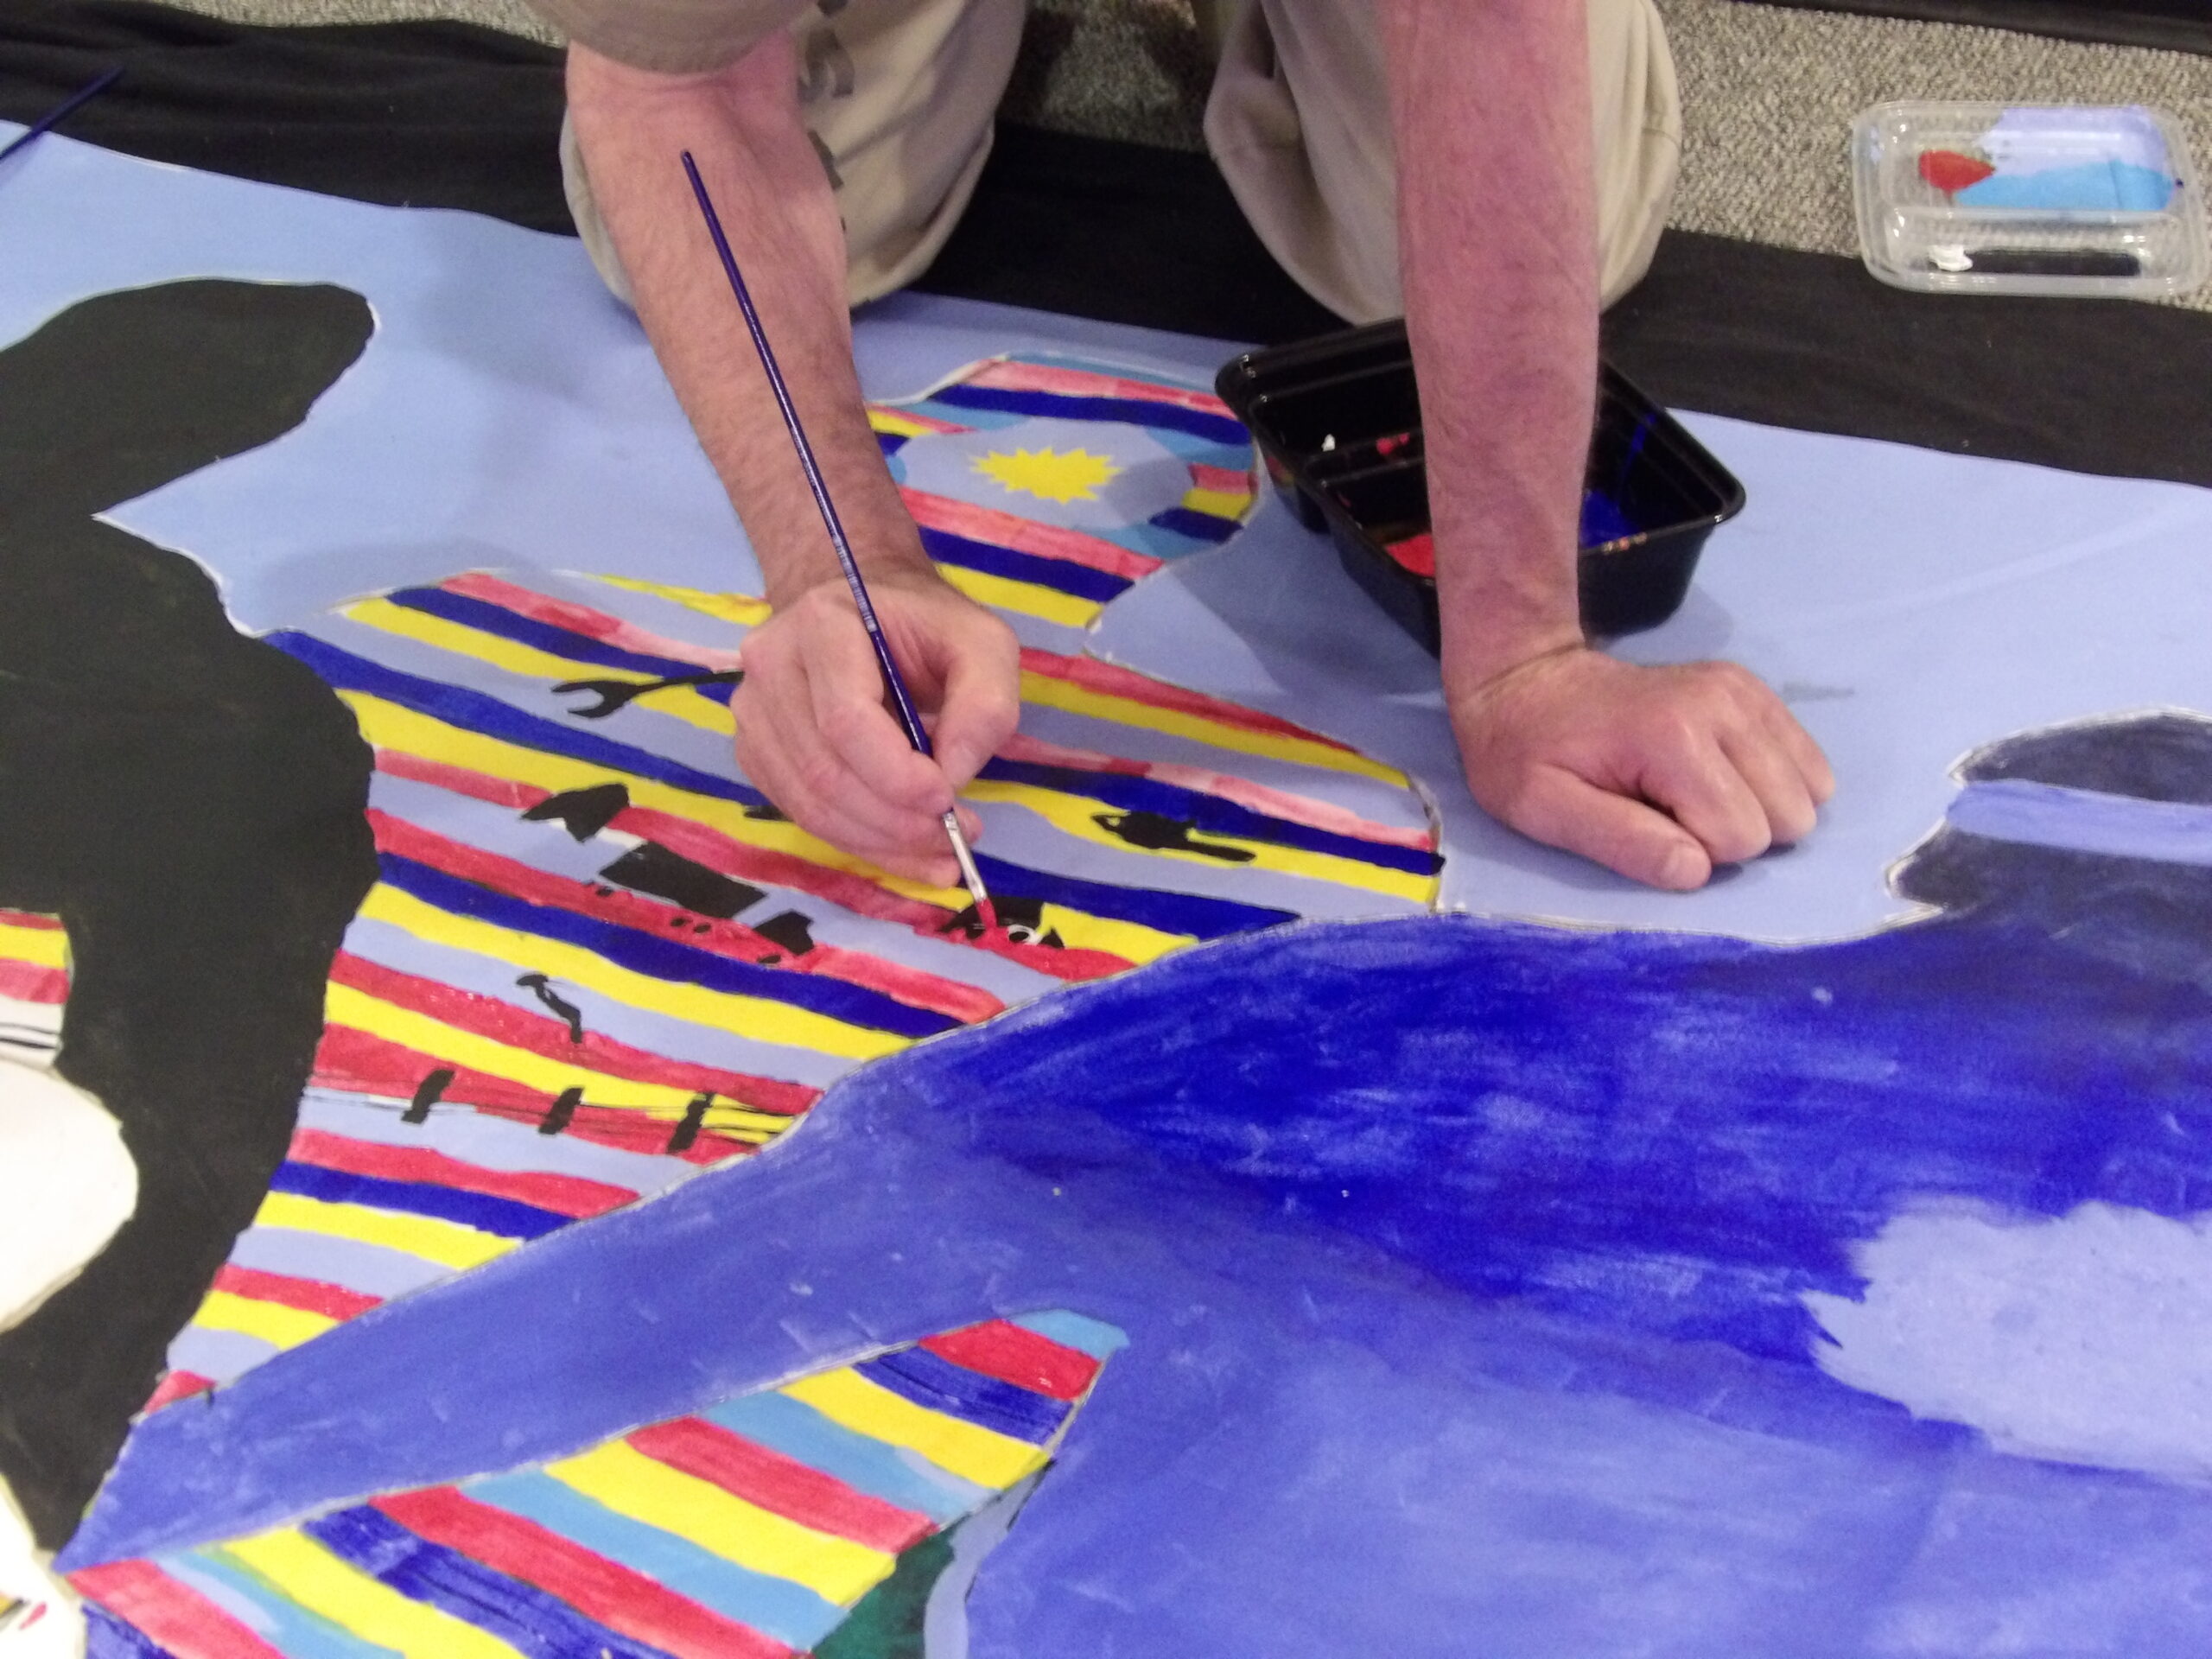 An in-progress painting with colorful figurative silhouettes rest on the ground as a person holding a paint brush works on it.